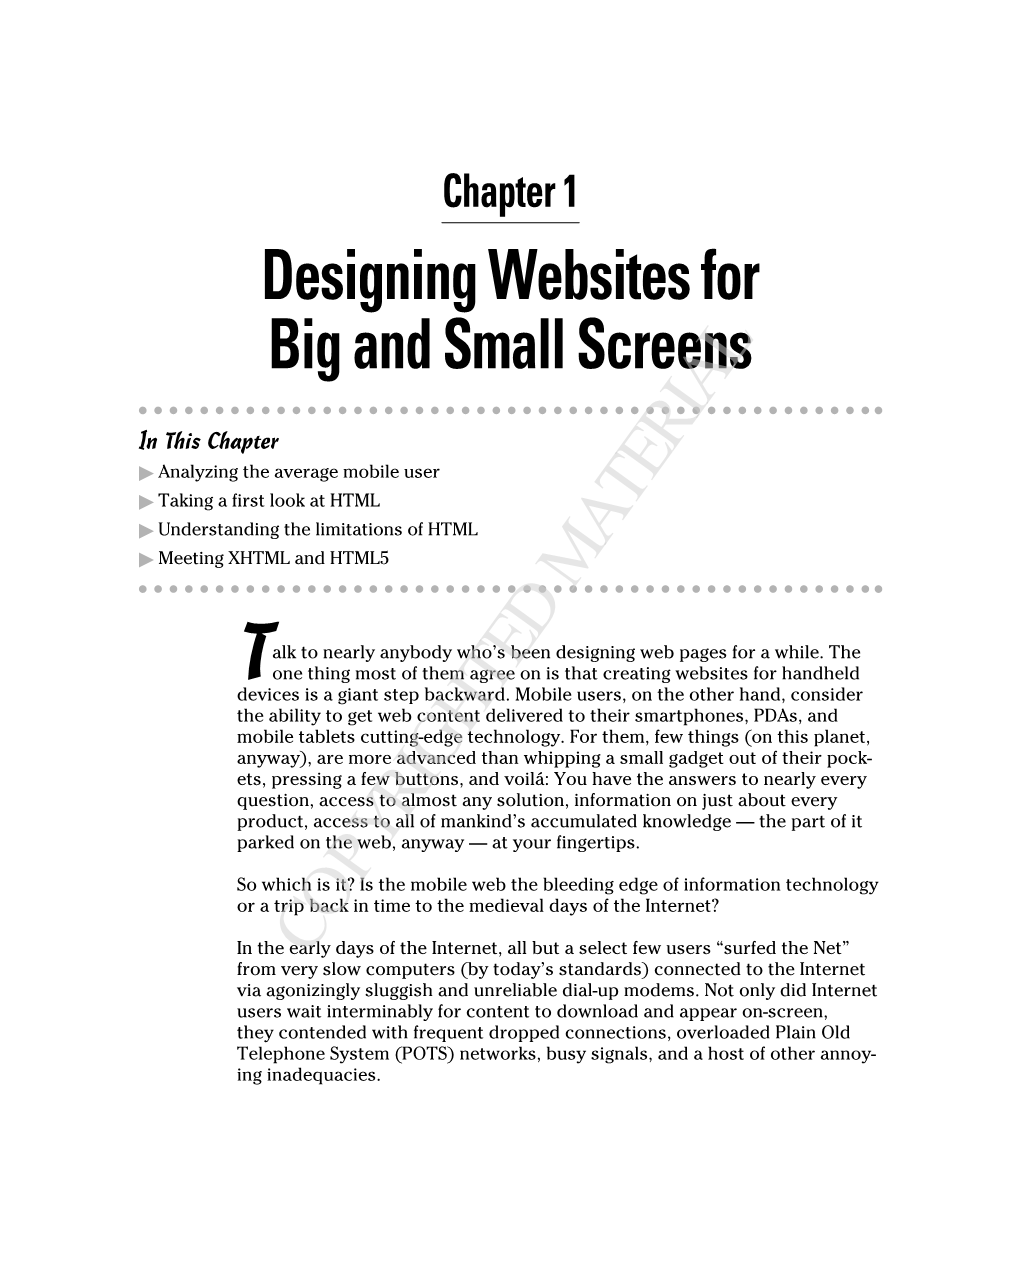 Designing Websites for Big and Small Screens